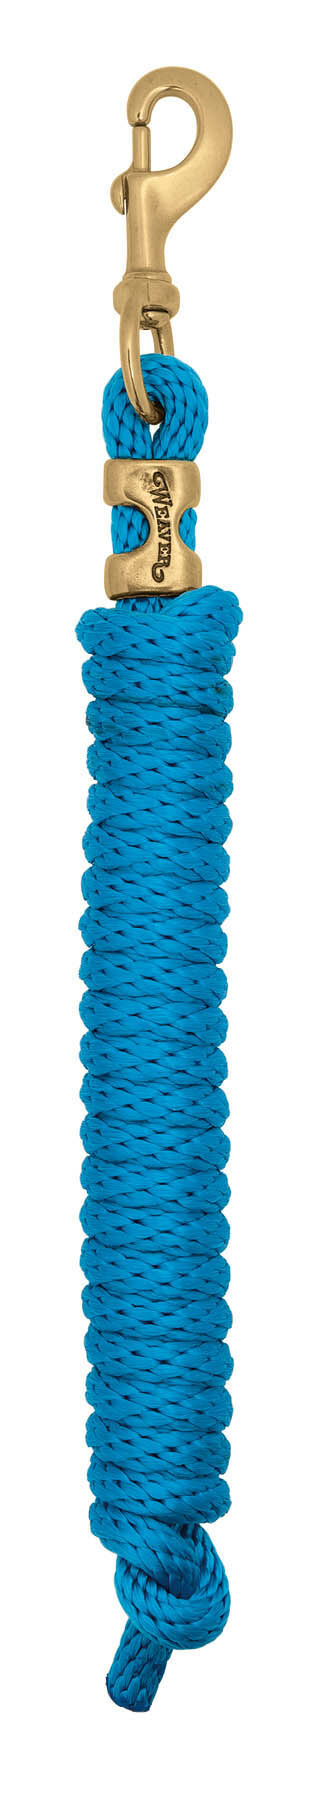 10 HURBLUE  POLY LEAD ROPE